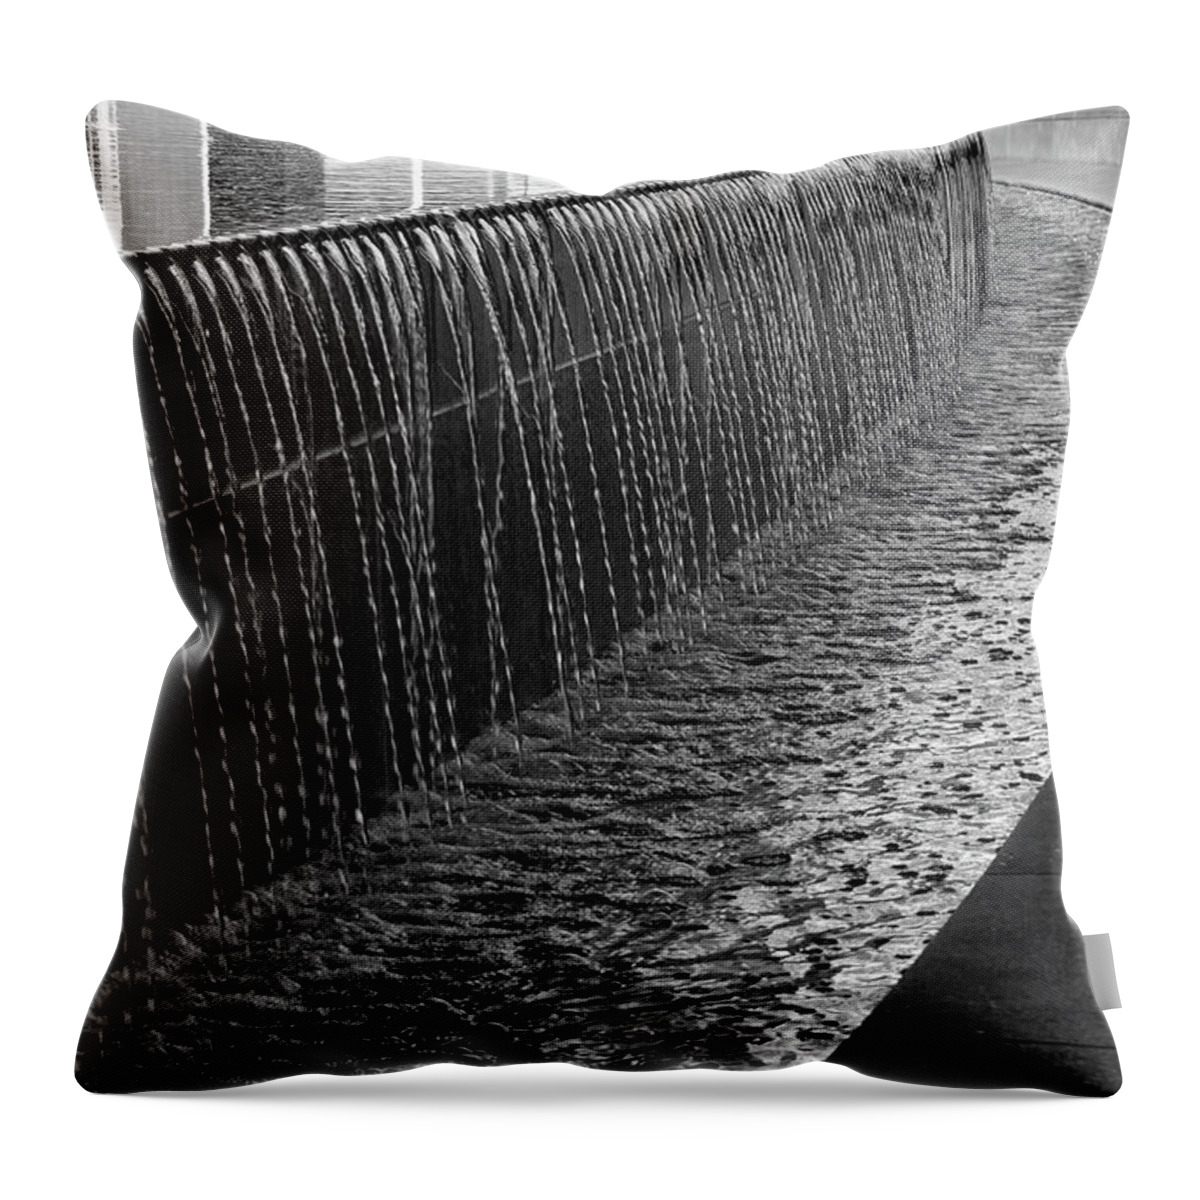 Abstract Throw Pillow featuring the photograph 1532 Jets by Silvia Marcoschamer